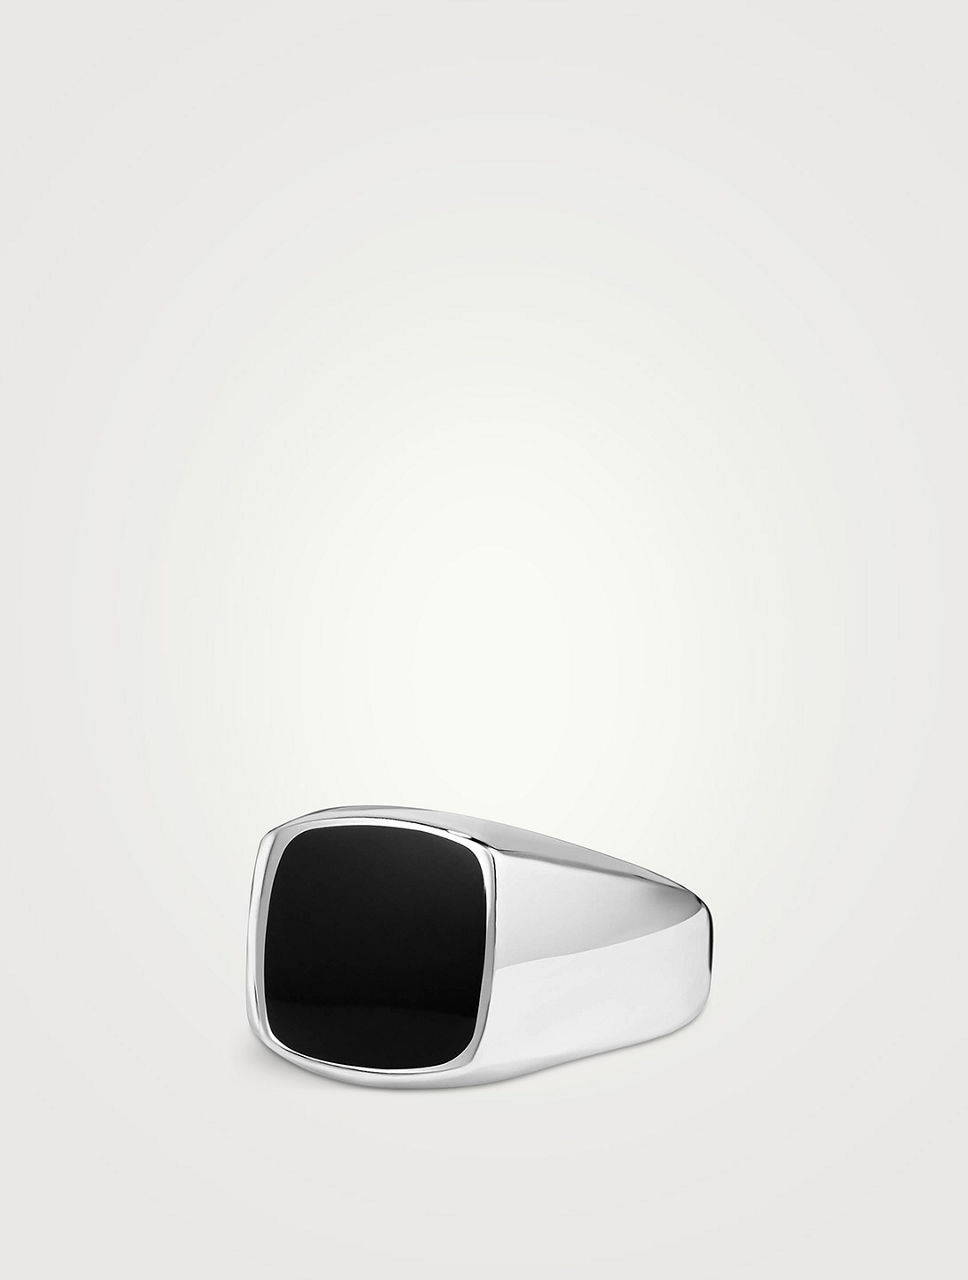 Exotic Stone Signet Ring In Sterling Silver With Black Onyx